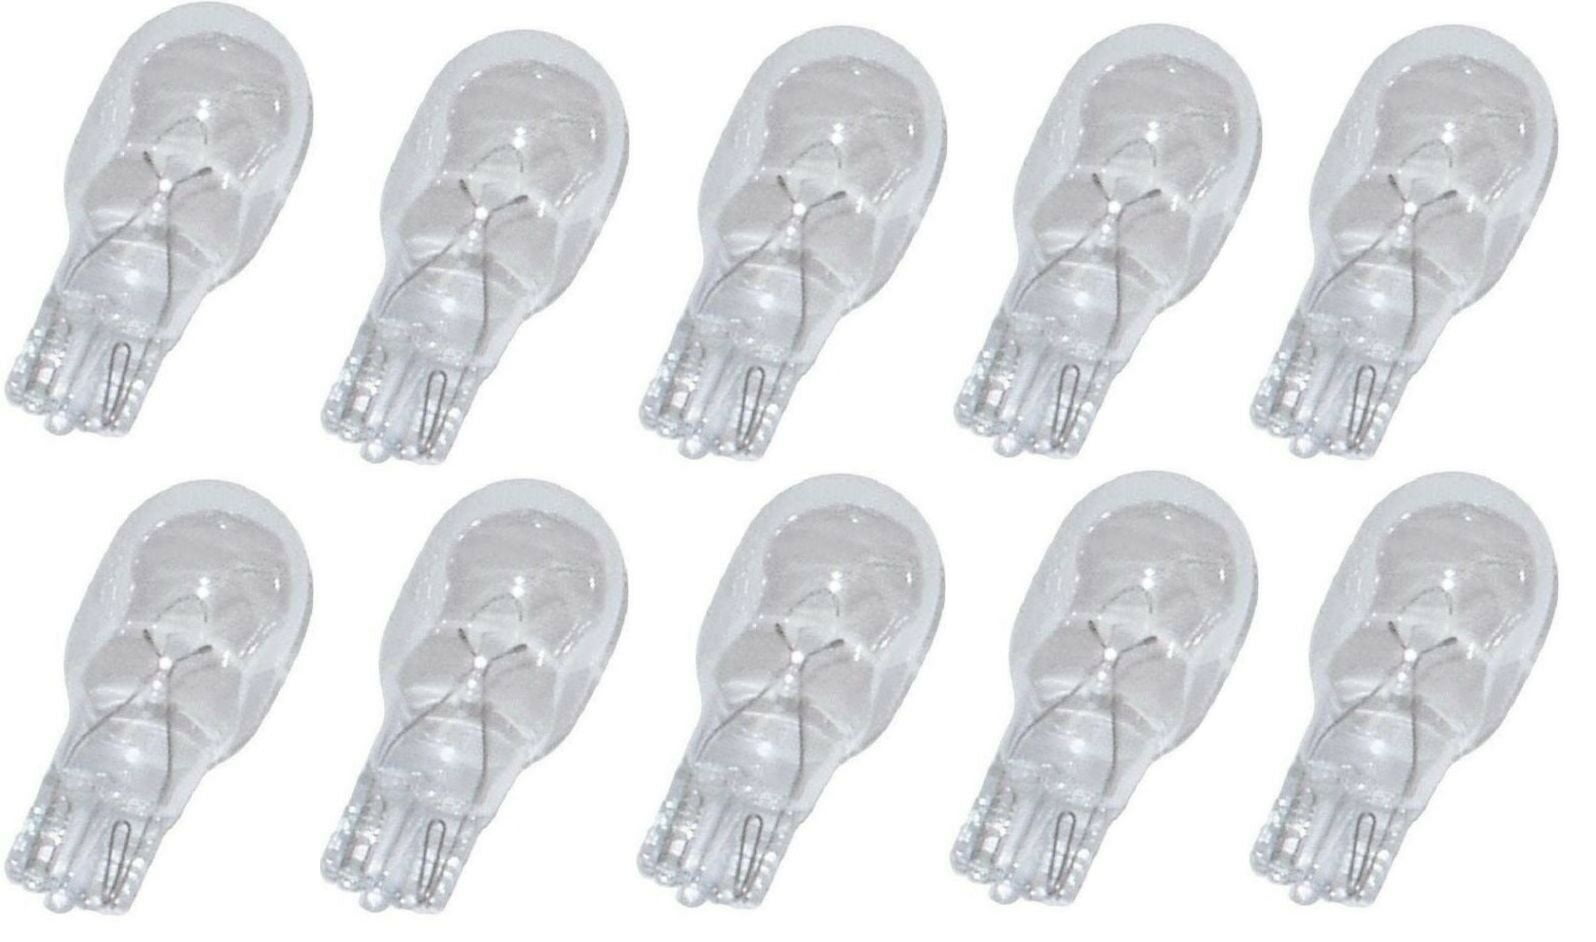 Malibu 4 Watt Clear Wedge Base Replacement Low Voltage Bulbs 4 pack 